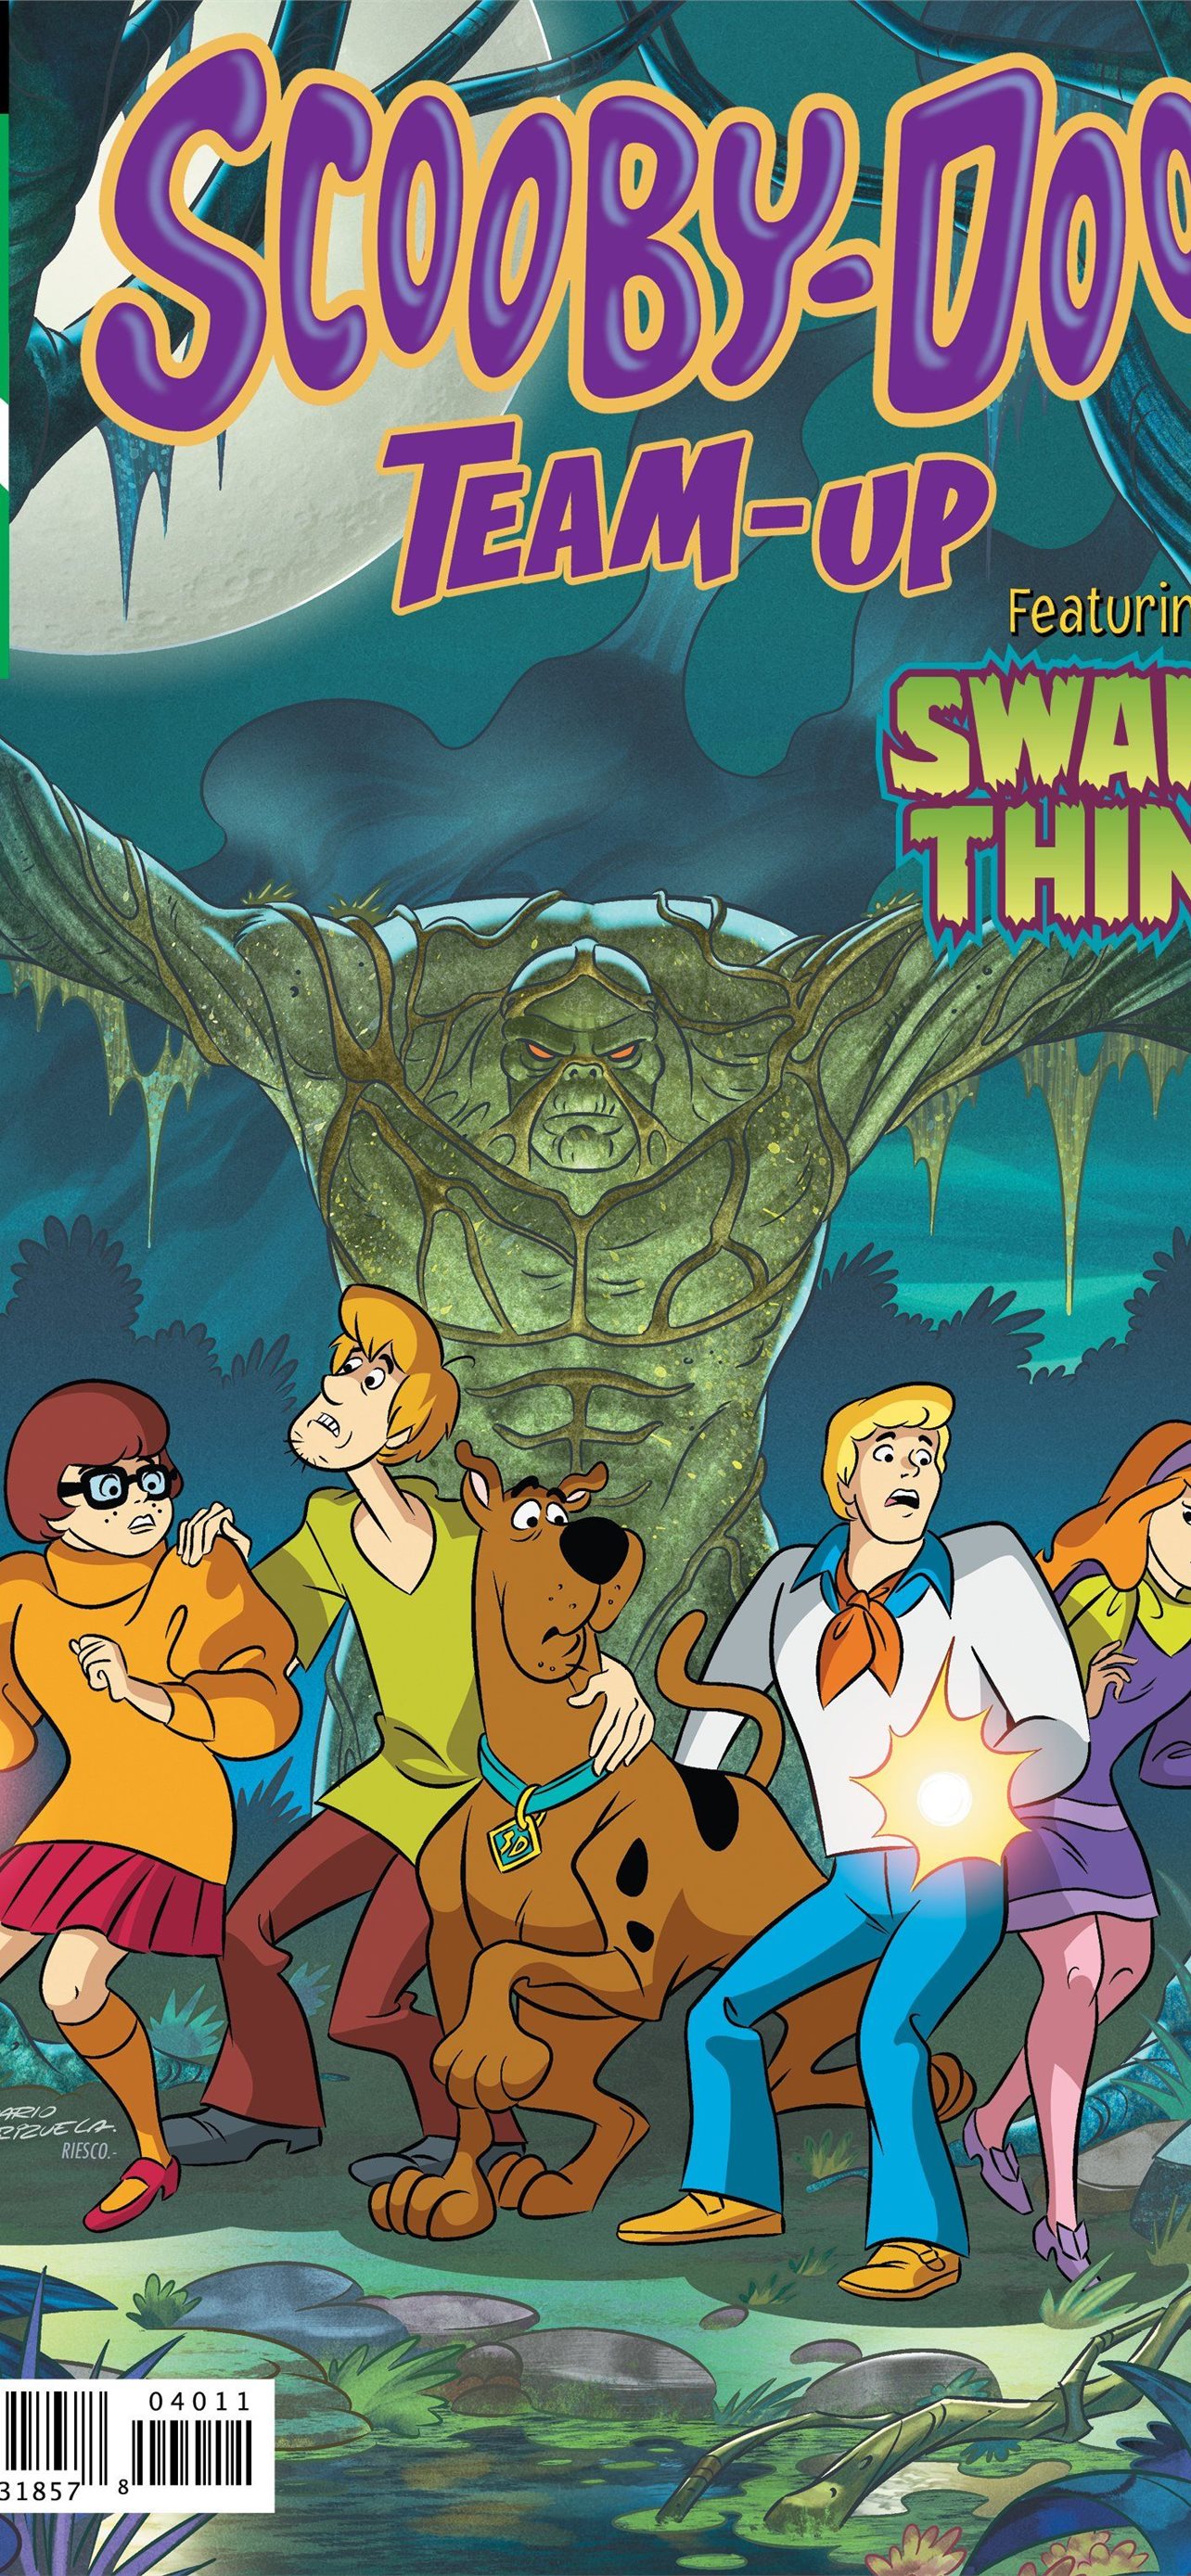 scooby doo where are you iPhone Wallpaper Free Download